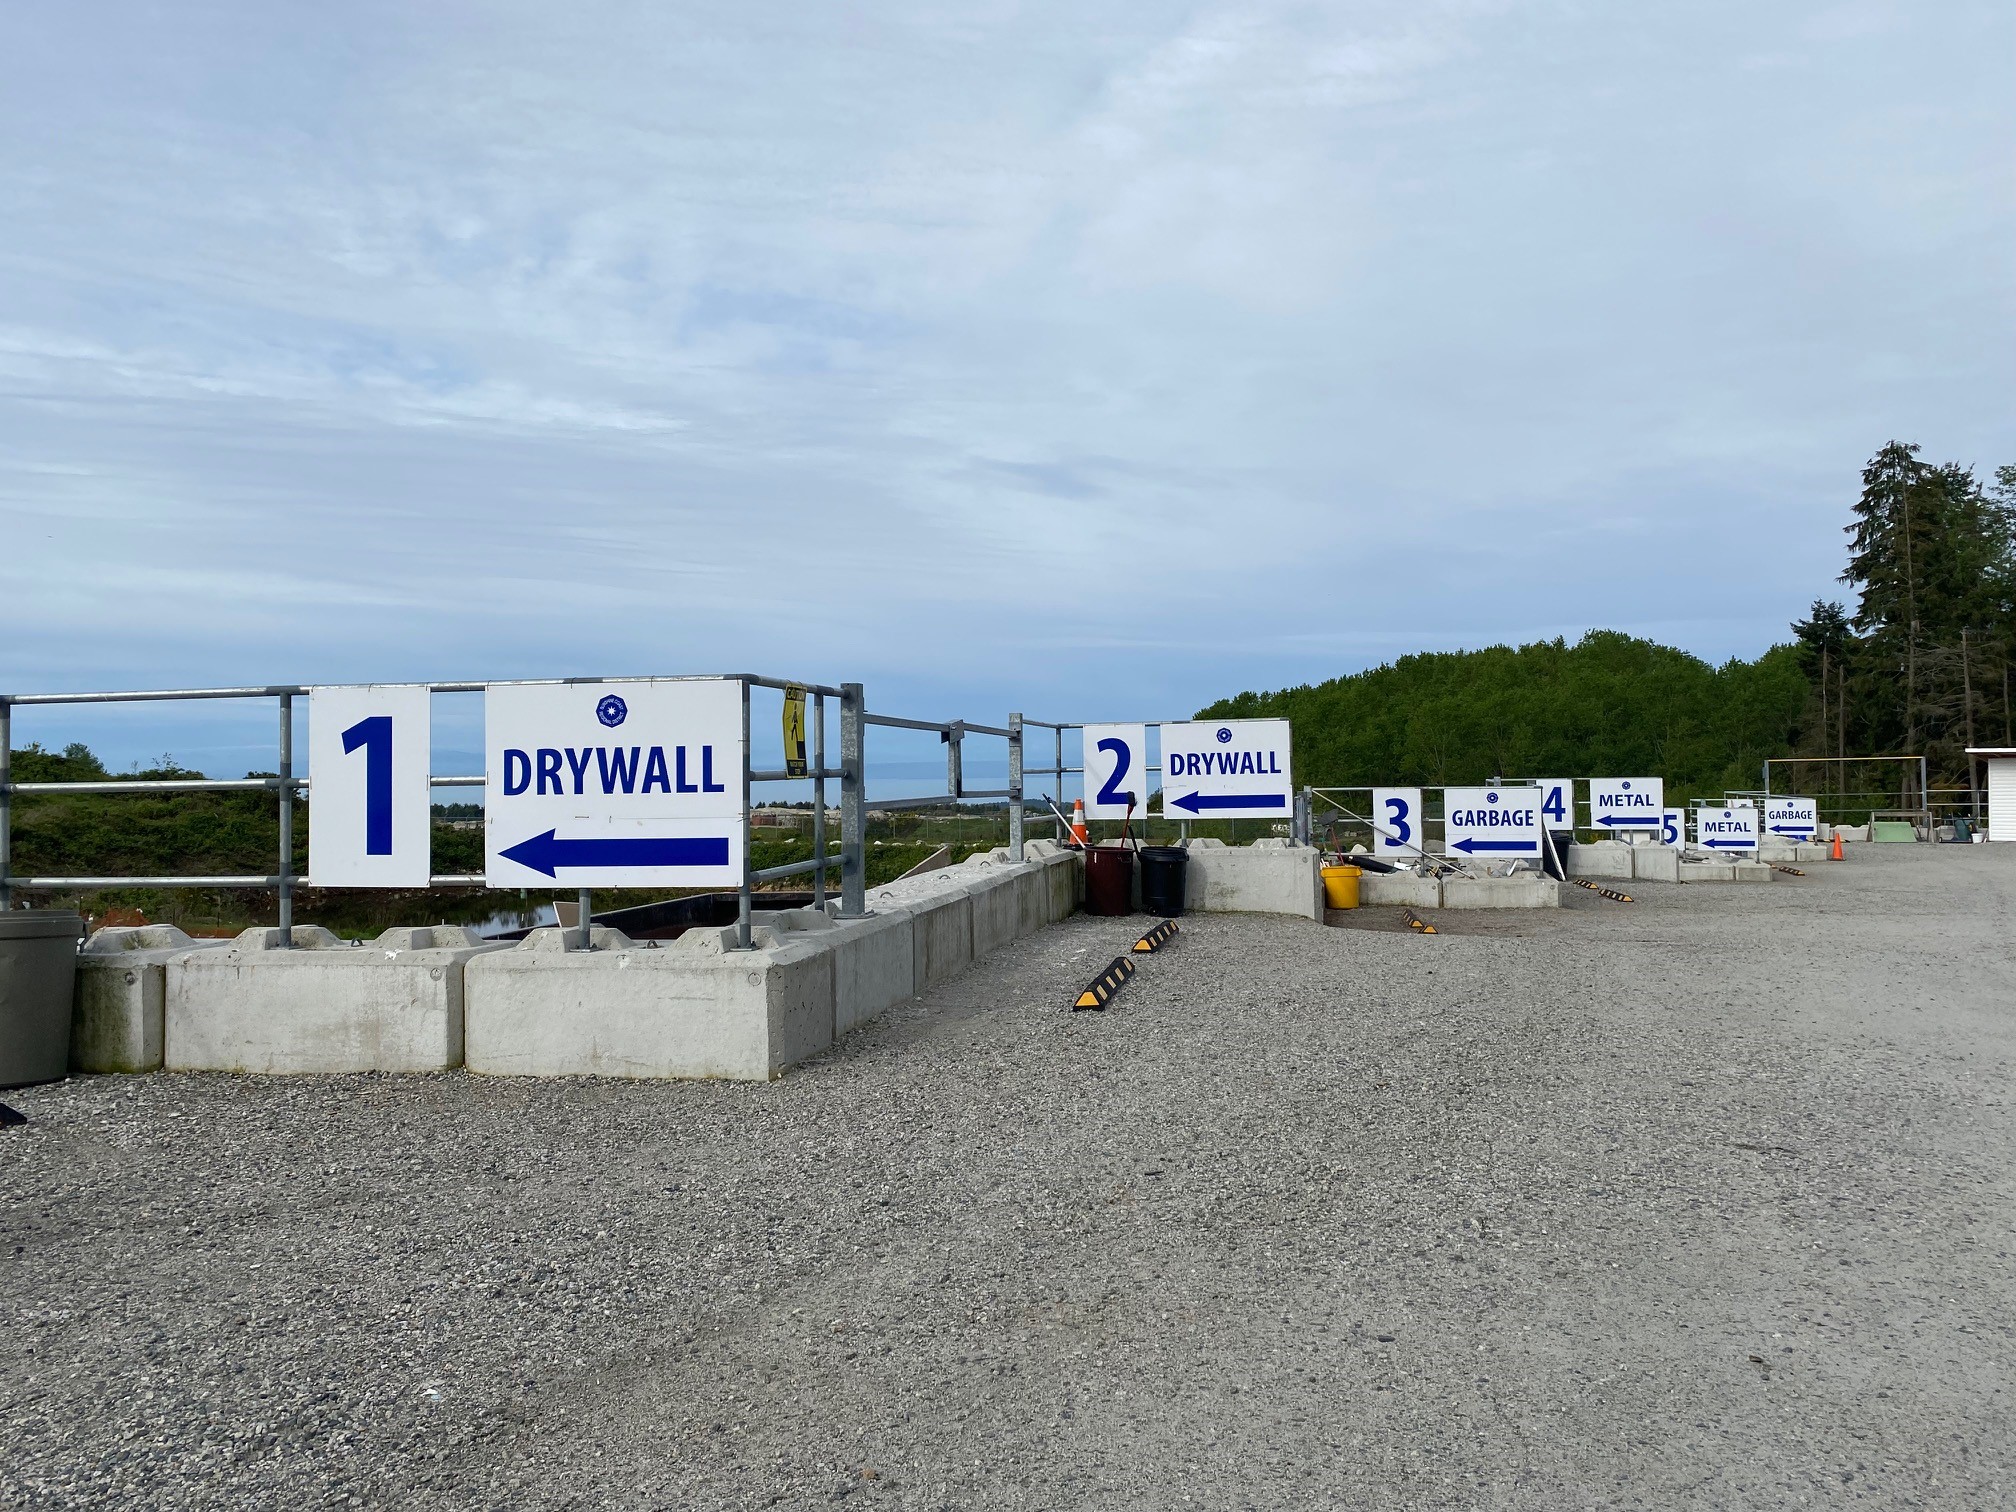 Drop off area at the Sechelt Landfill